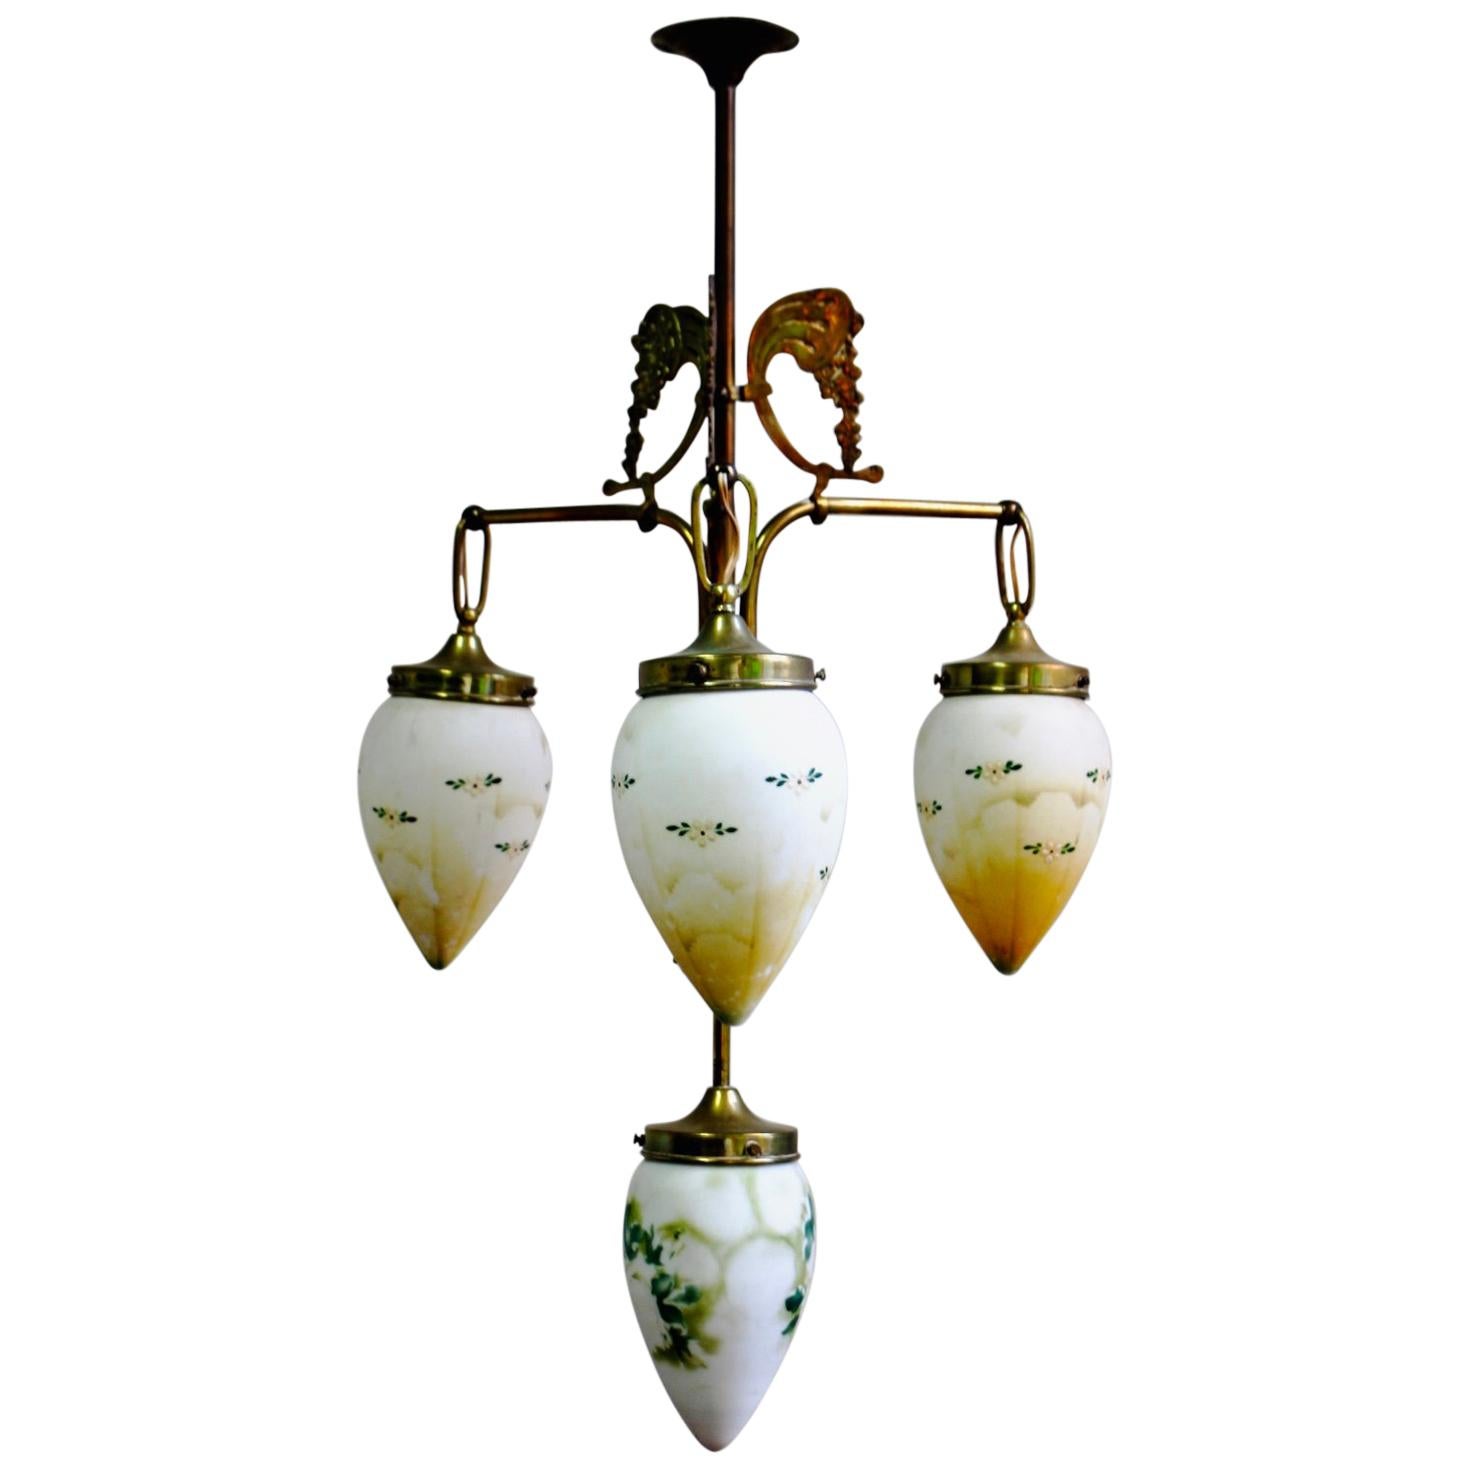 Antique Art Nouveau Brass Chandelier with Hand Painted Glass Shades im Angebot